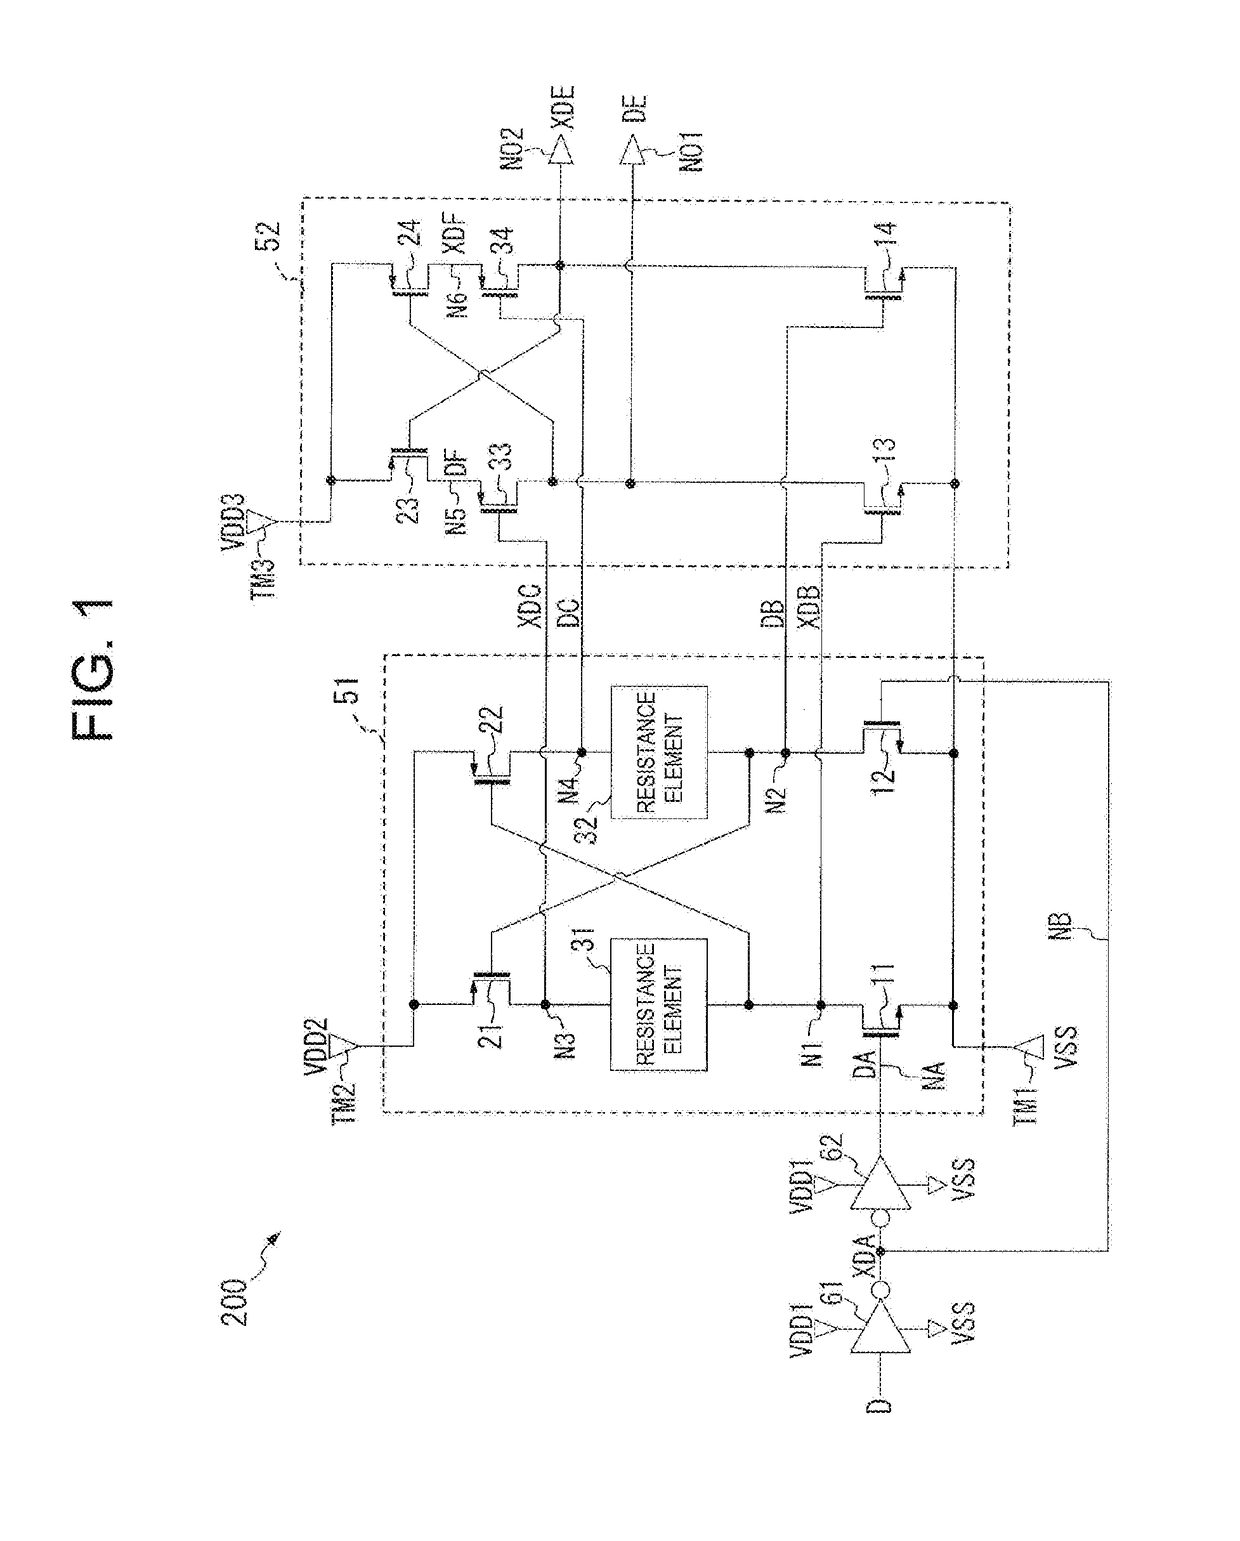 Level shift circuit and display driver